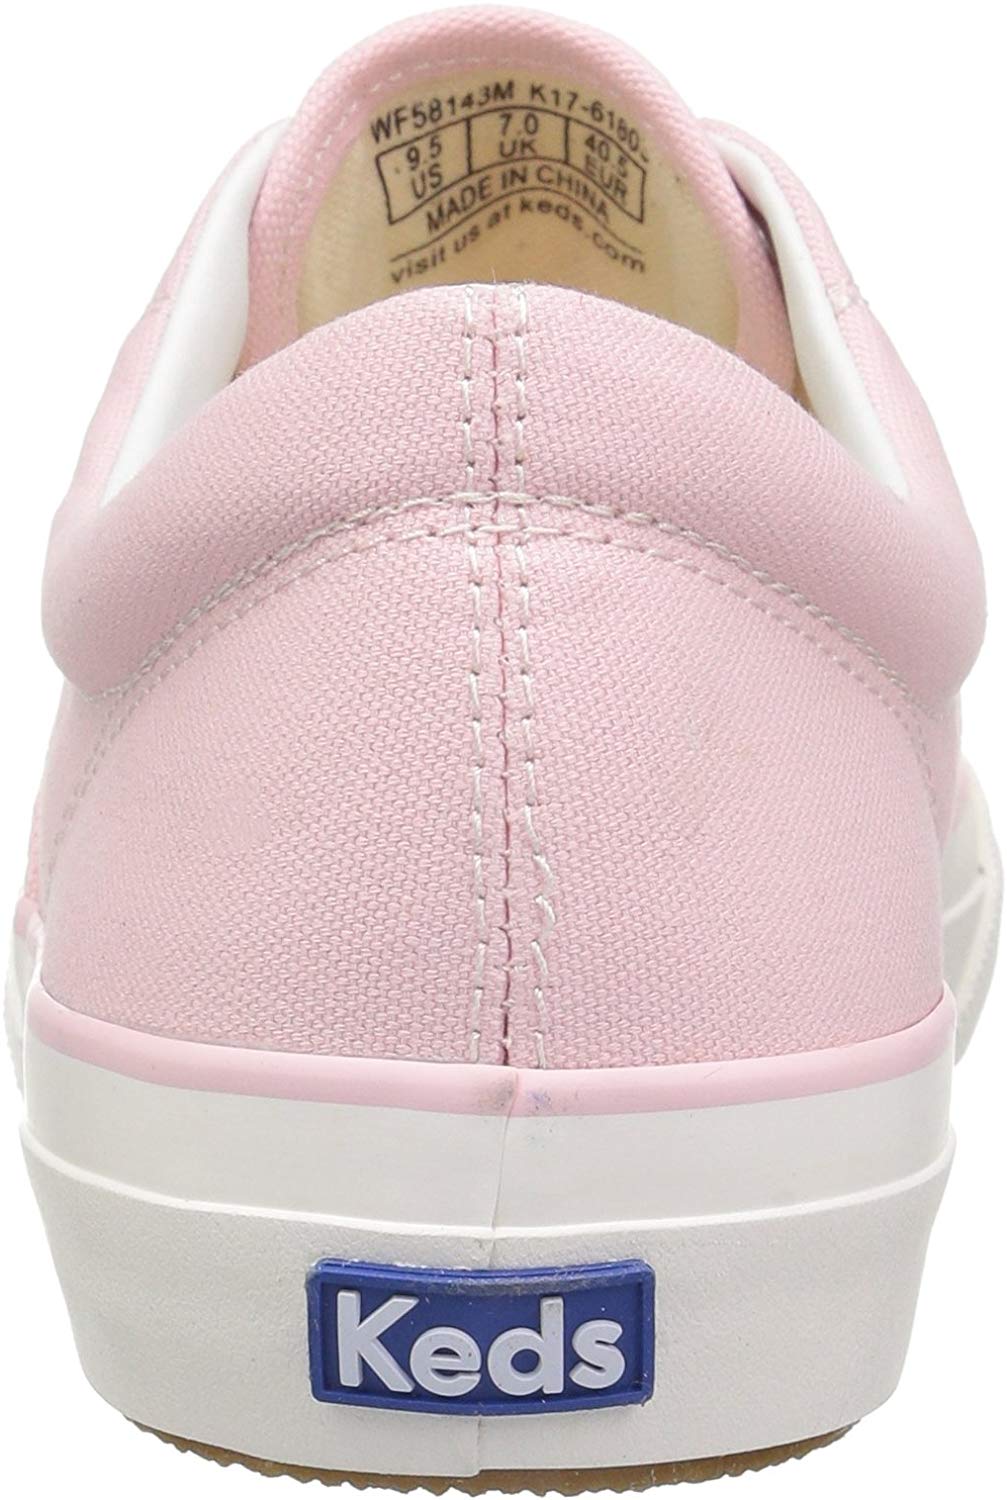 Keds Womens Anchor Canvas Sneakers